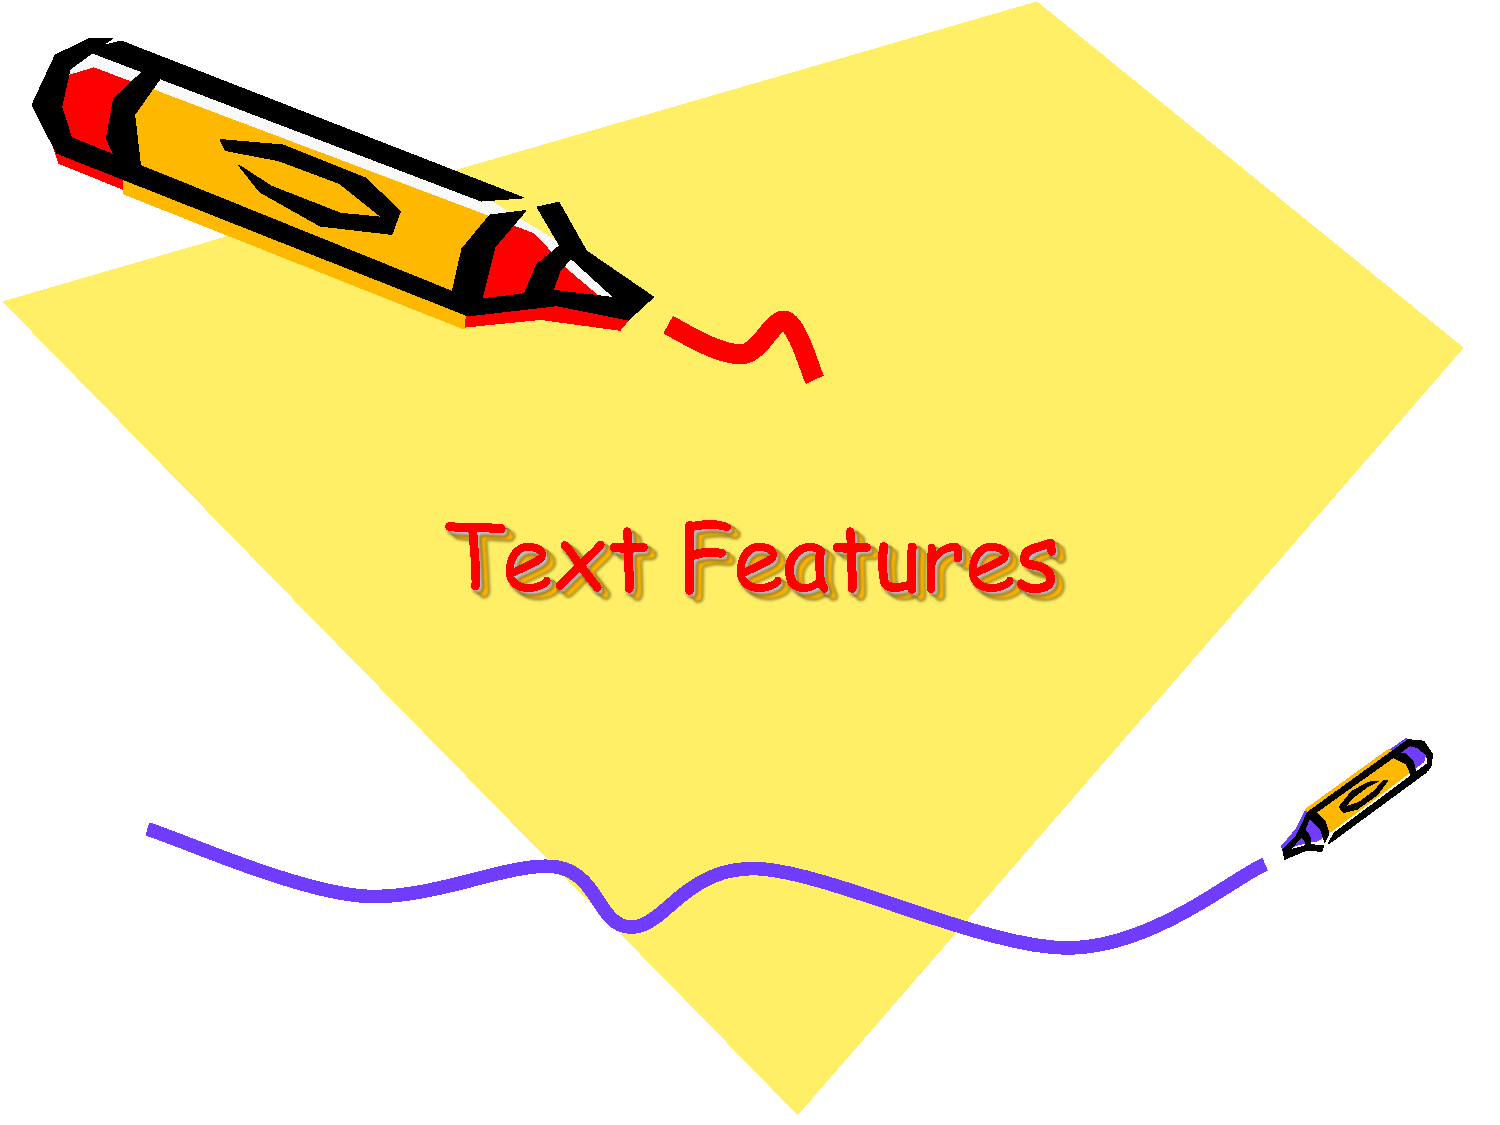 Text features clipart